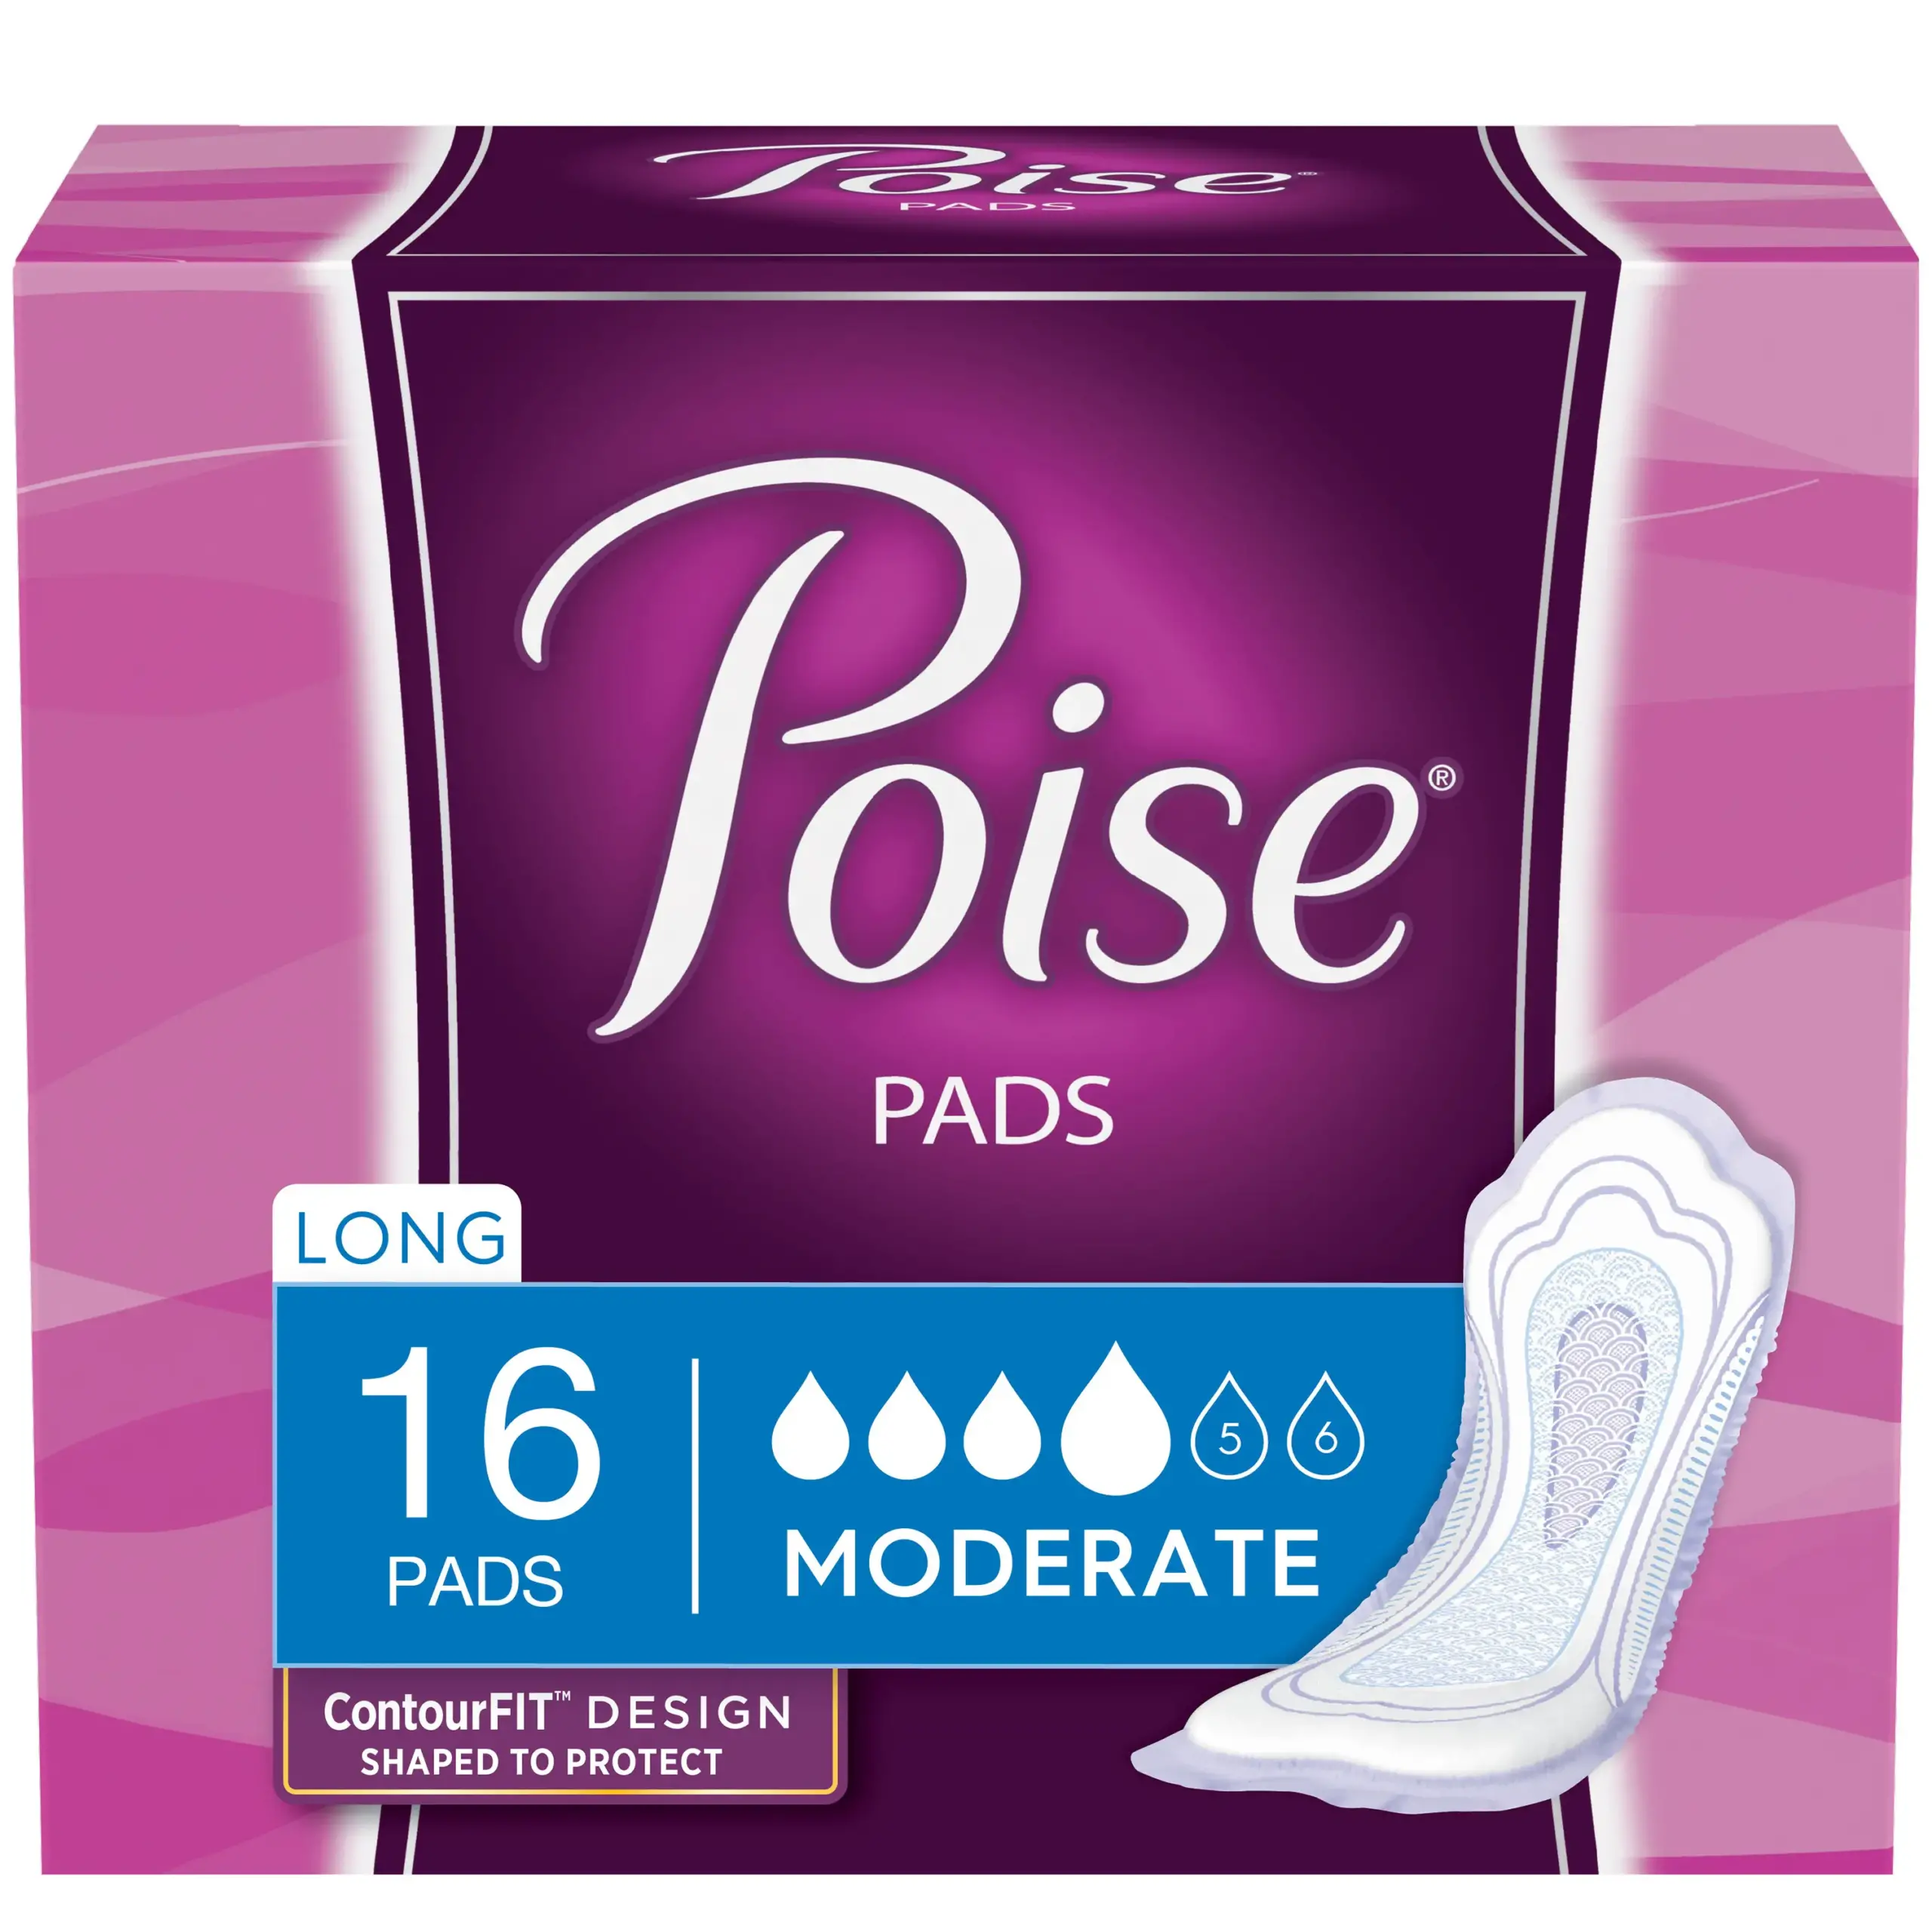 Poise Pads Moderate Absorbency Long Pads 12.4"